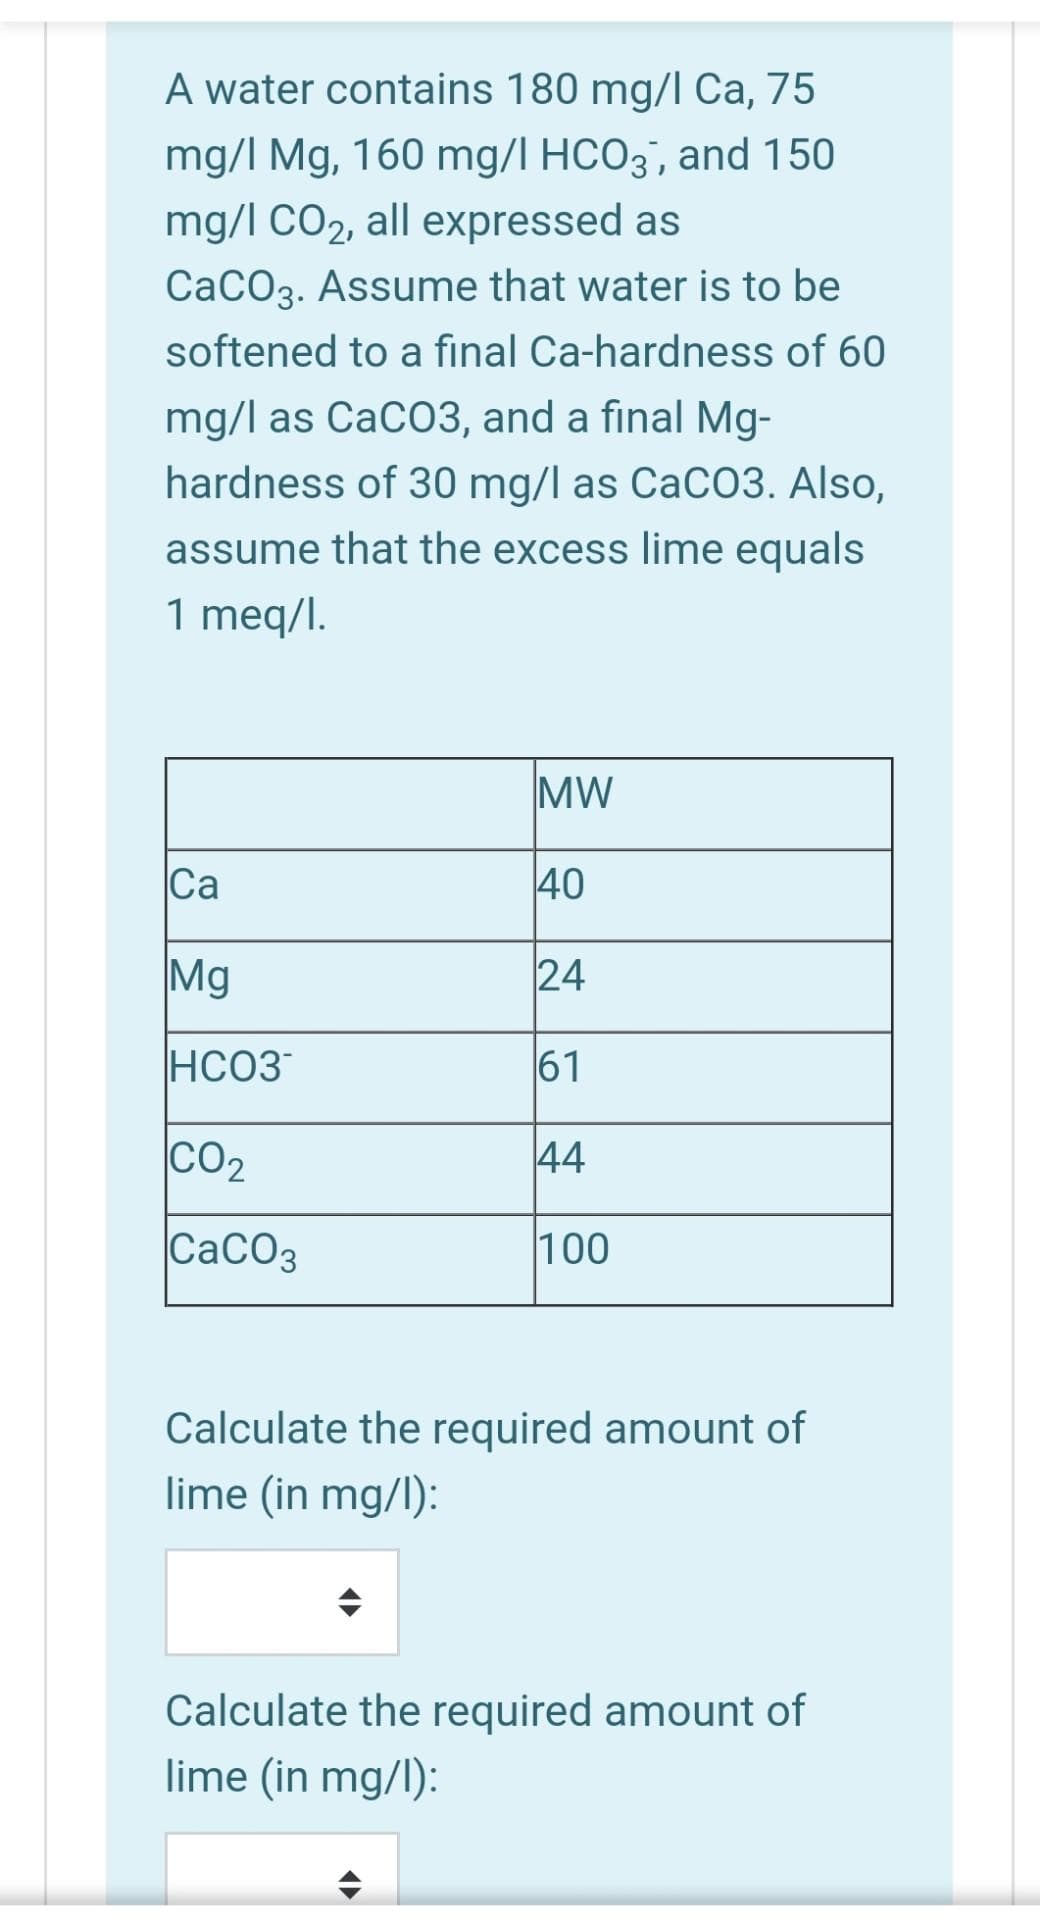 A water contains 180 mg/l Ca, 75
mg/I Mg, 160 mg/l HCO3', and 150
mg/l CO2, all expressed as
CaCO3. Assume that water is to be
softened to a final Ca-hardness of 60
mg/l as CaCO3, and a final Mg-
hardness of 30 mg/l as CaCO3. Also,
assume that the excess lime equals
1 meq/l.
MW
Ca
40
Mg
24
HCO3
61
CO2
44
CaCO3
100
Calculate the required amount of
lime (in mg/l):
Calculate the required amount of
lime (in mg/l):
